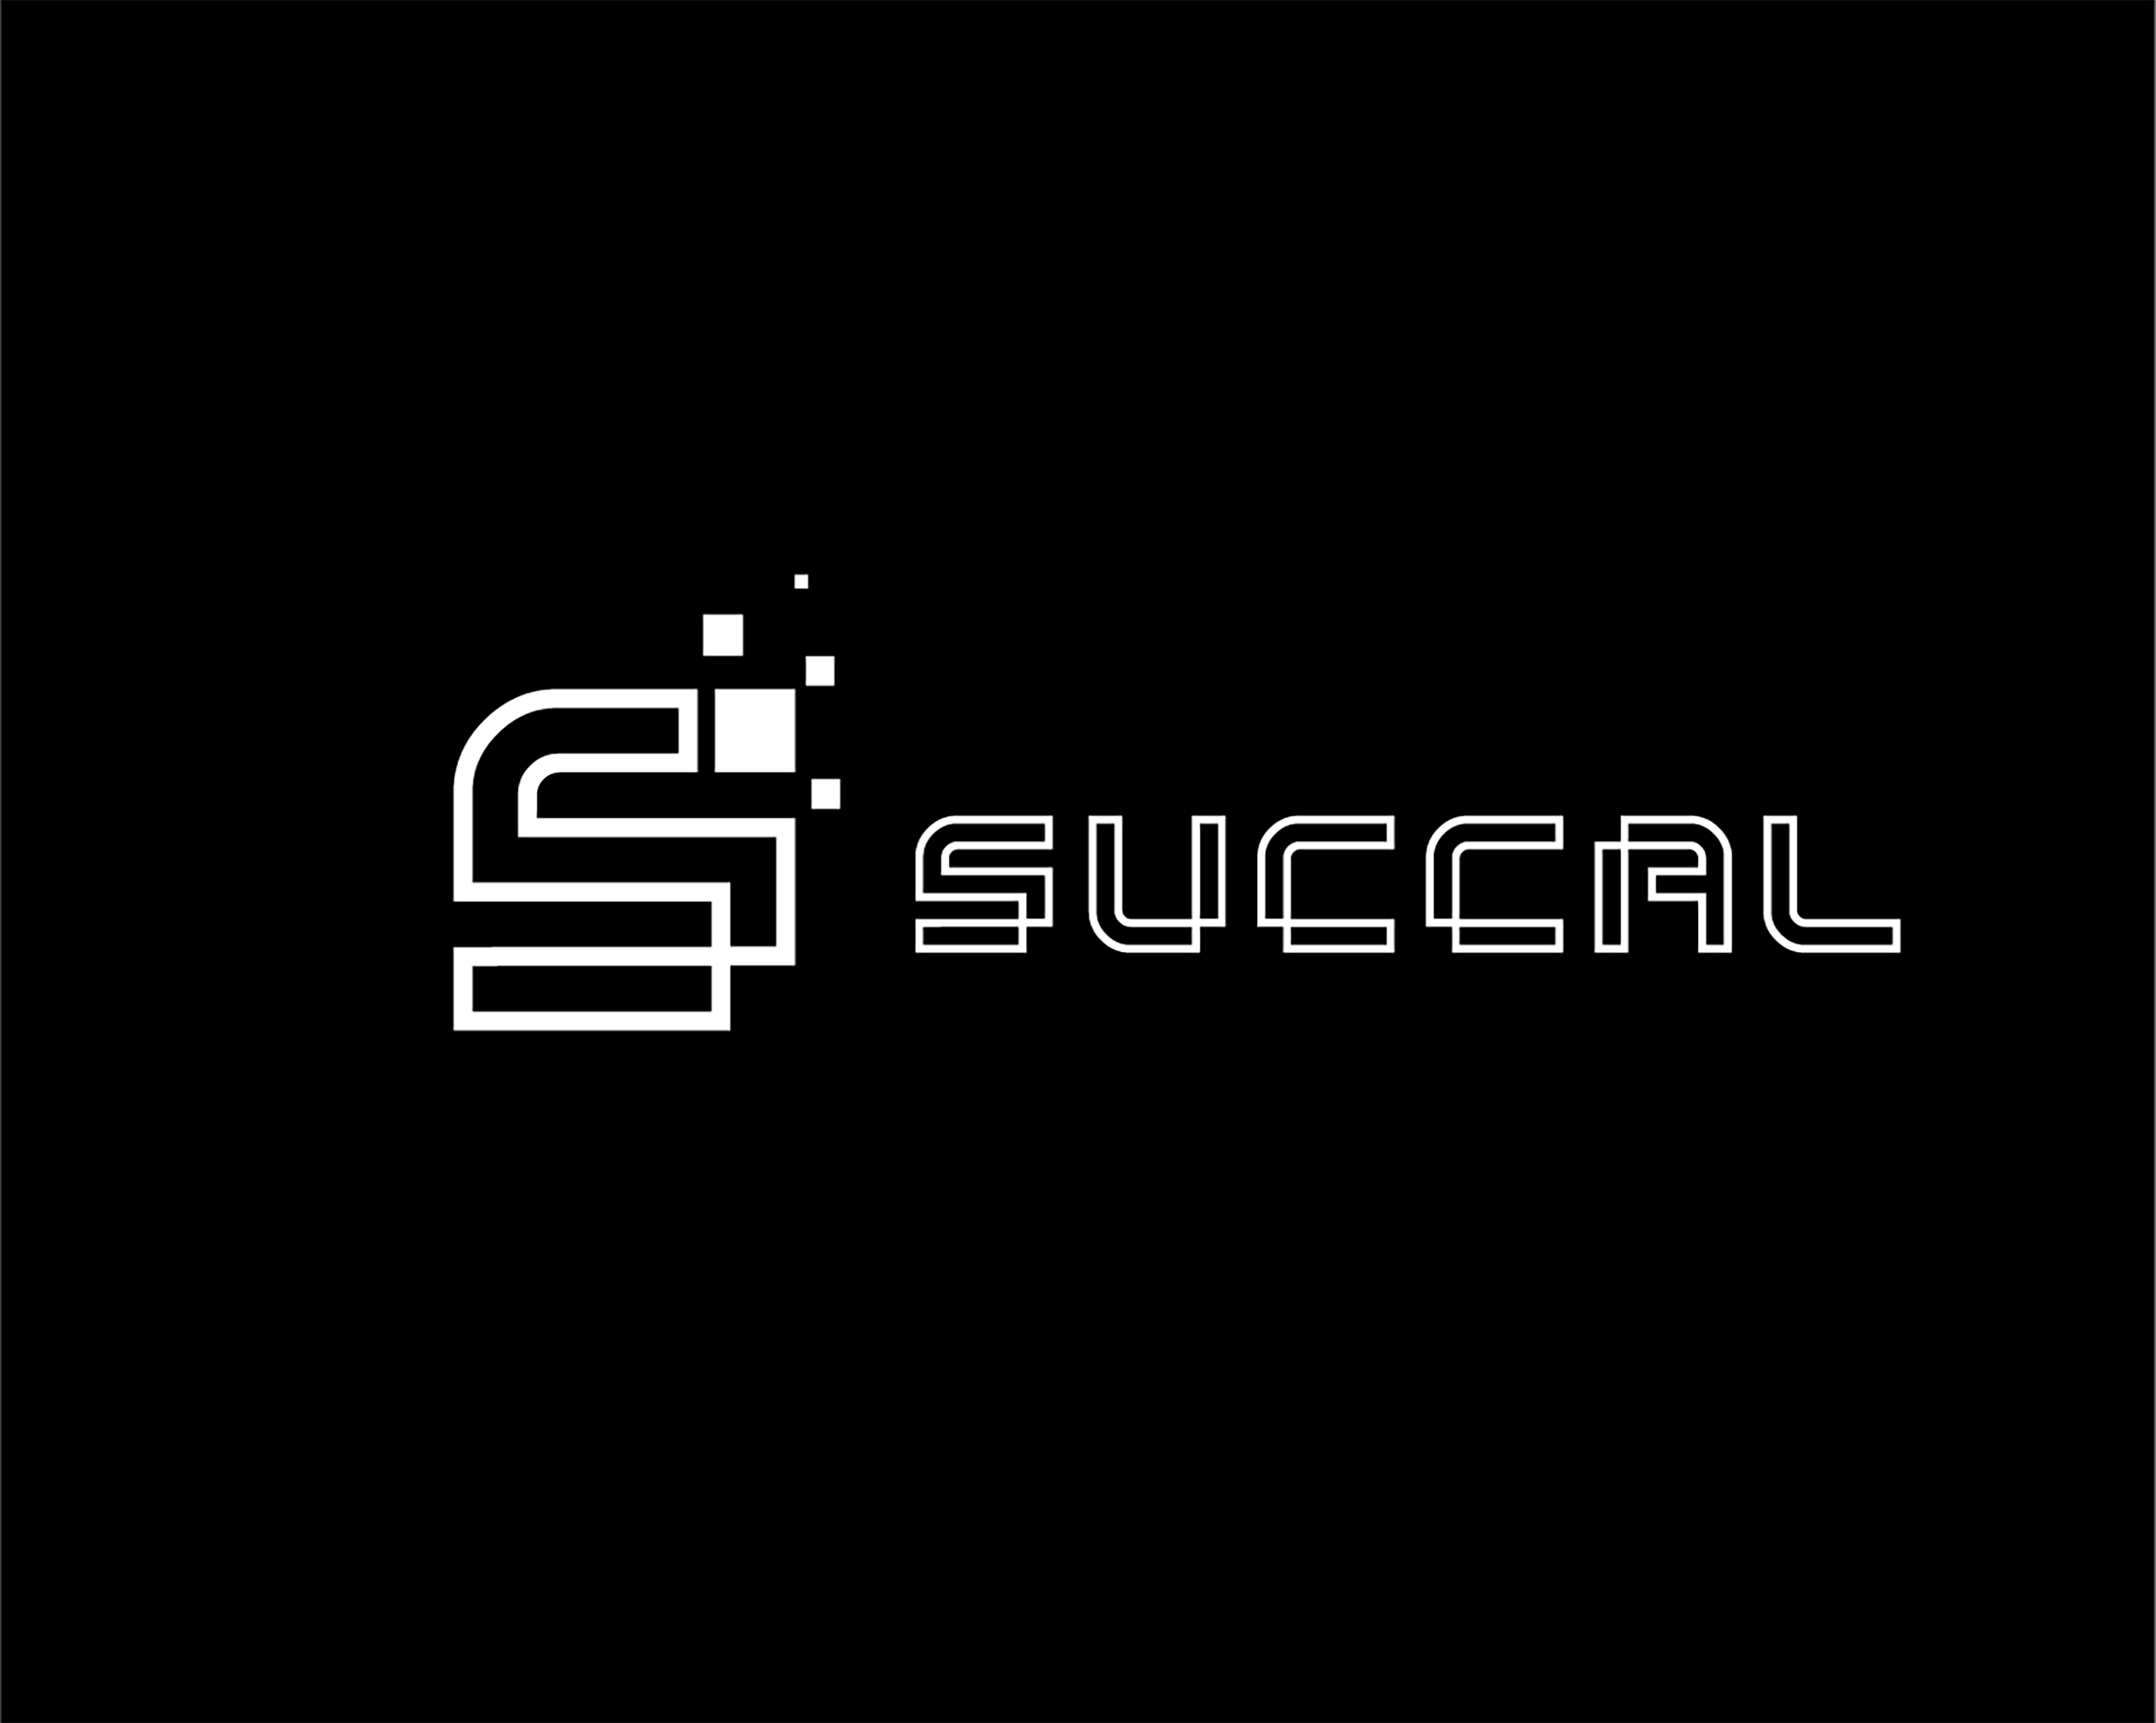 Succal